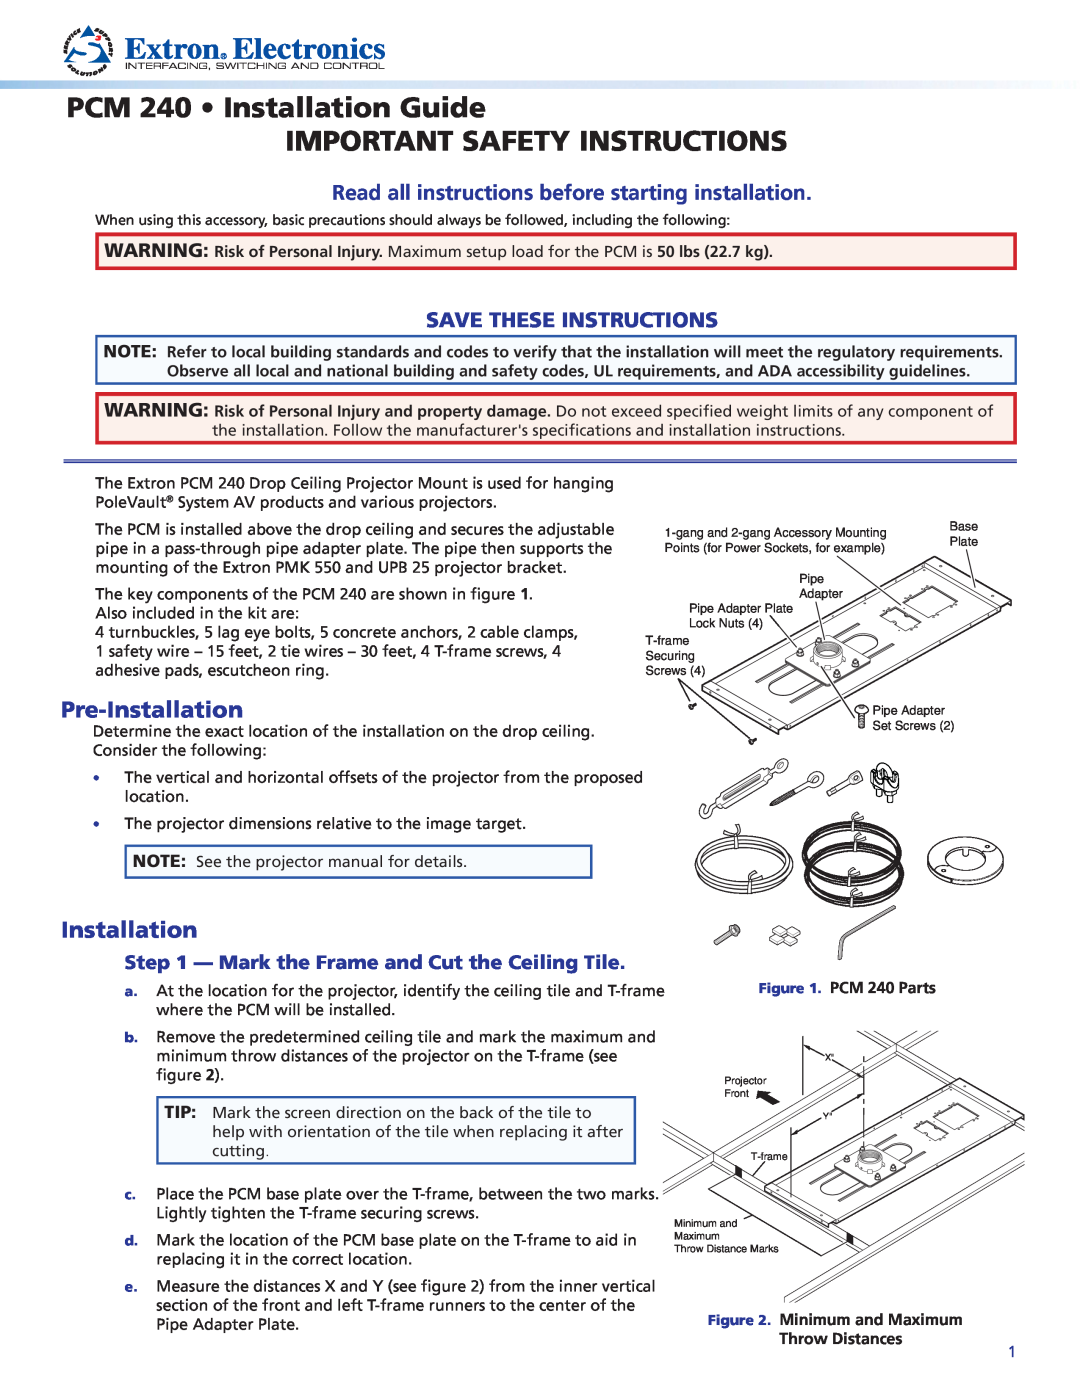 Extron electronic PCM 240 important safety instructions Pre-Installation, Mark the Frame and Cut the Ceiling Tile 